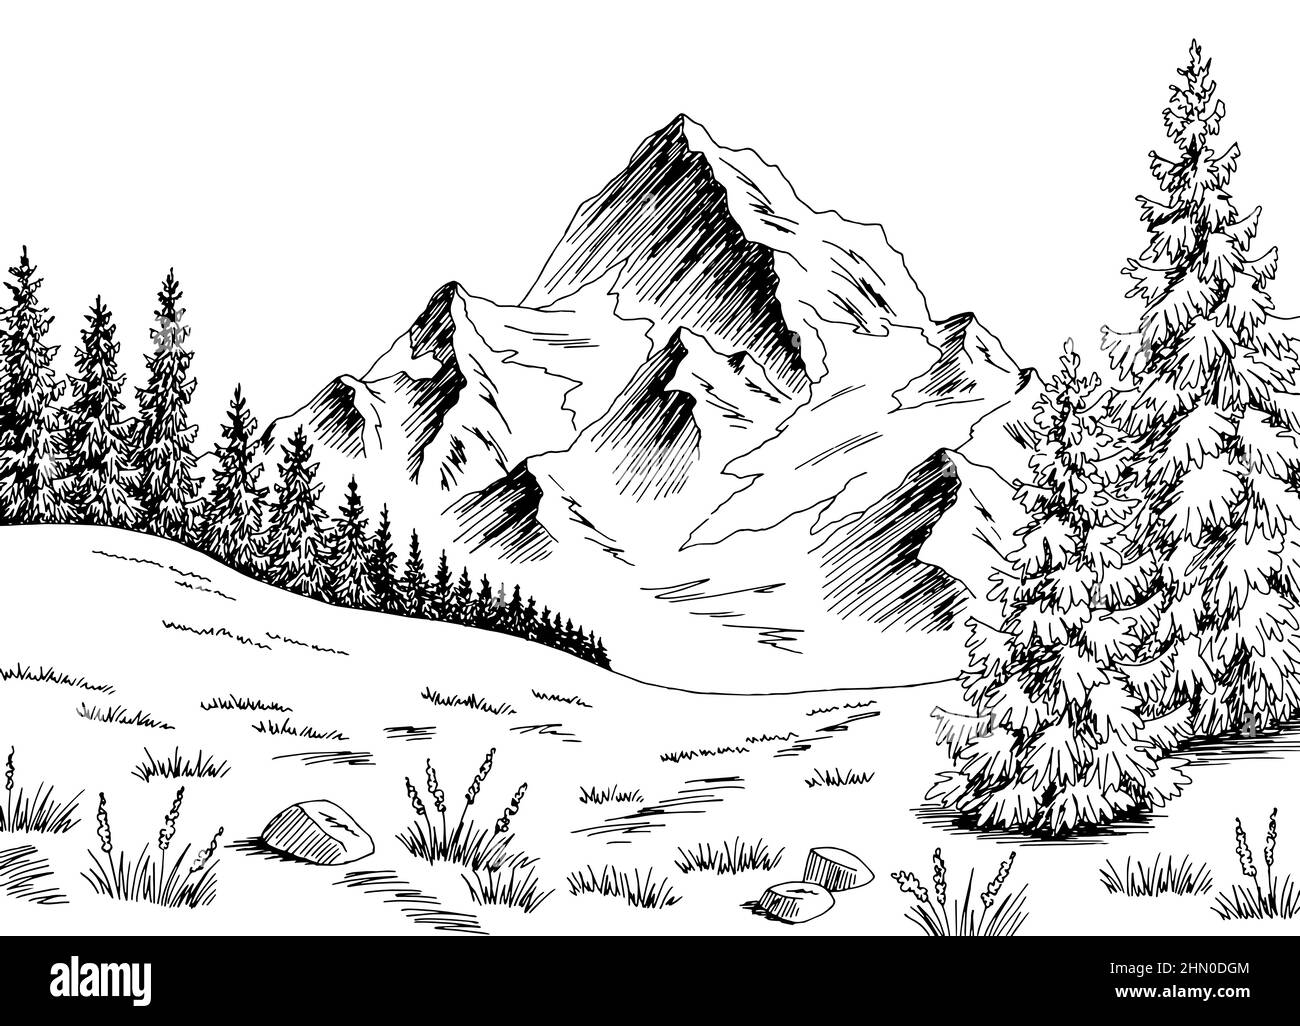 Hill Drawing Images  Free Download on Freepik